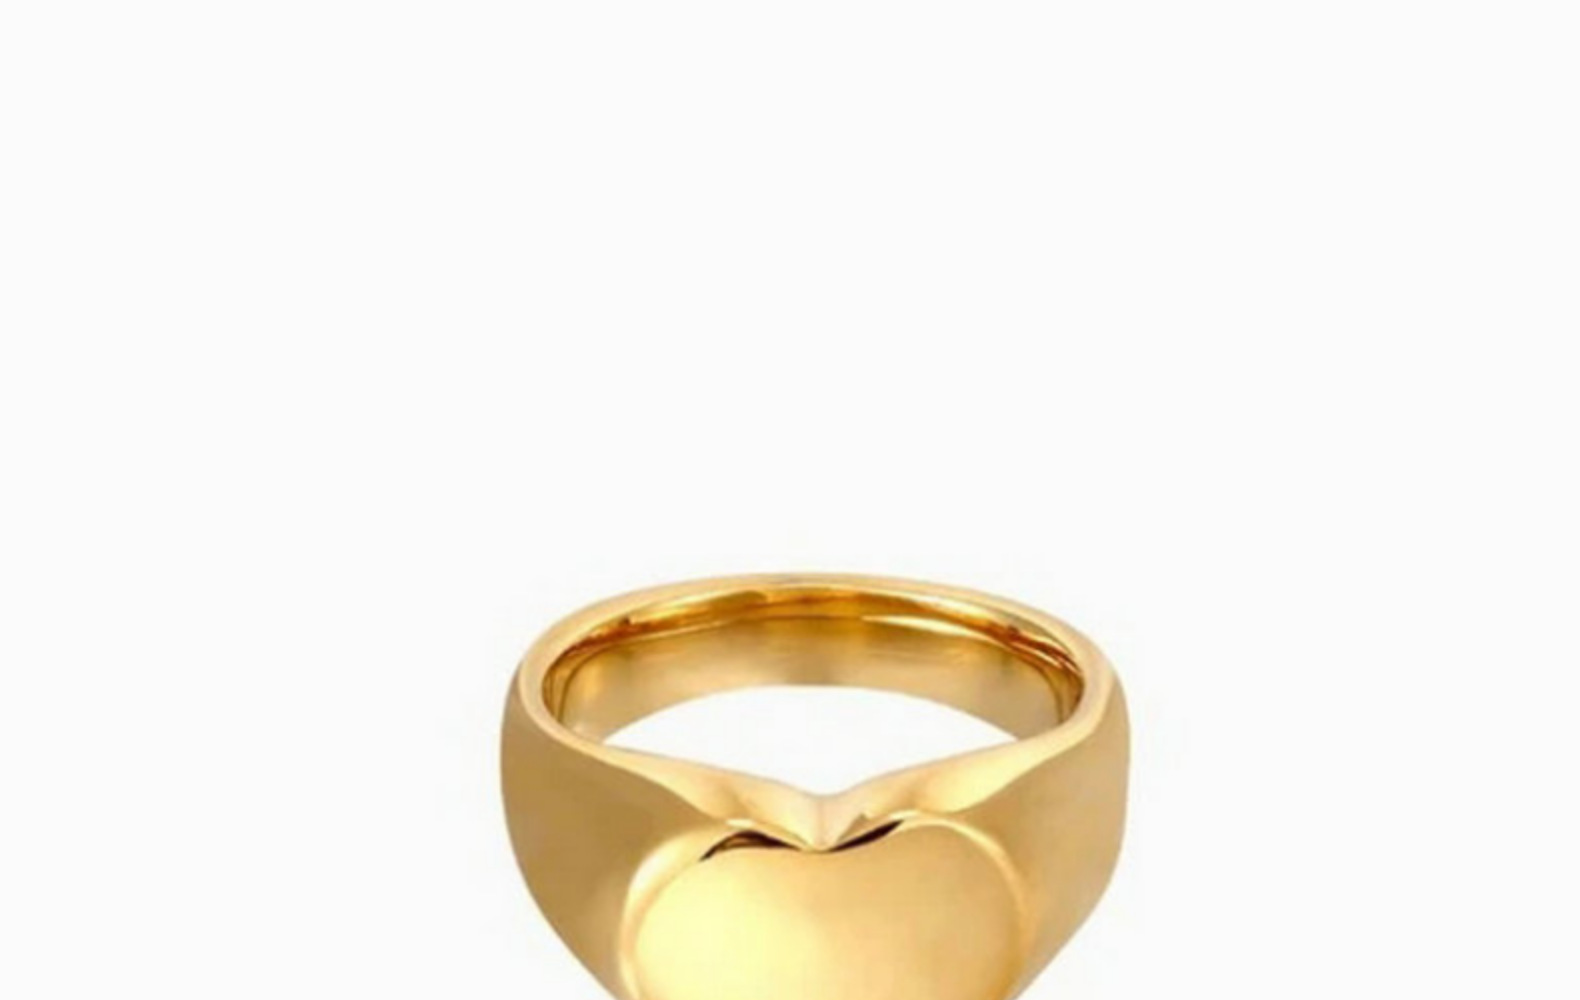 Retro stainless steel love ringpicture8